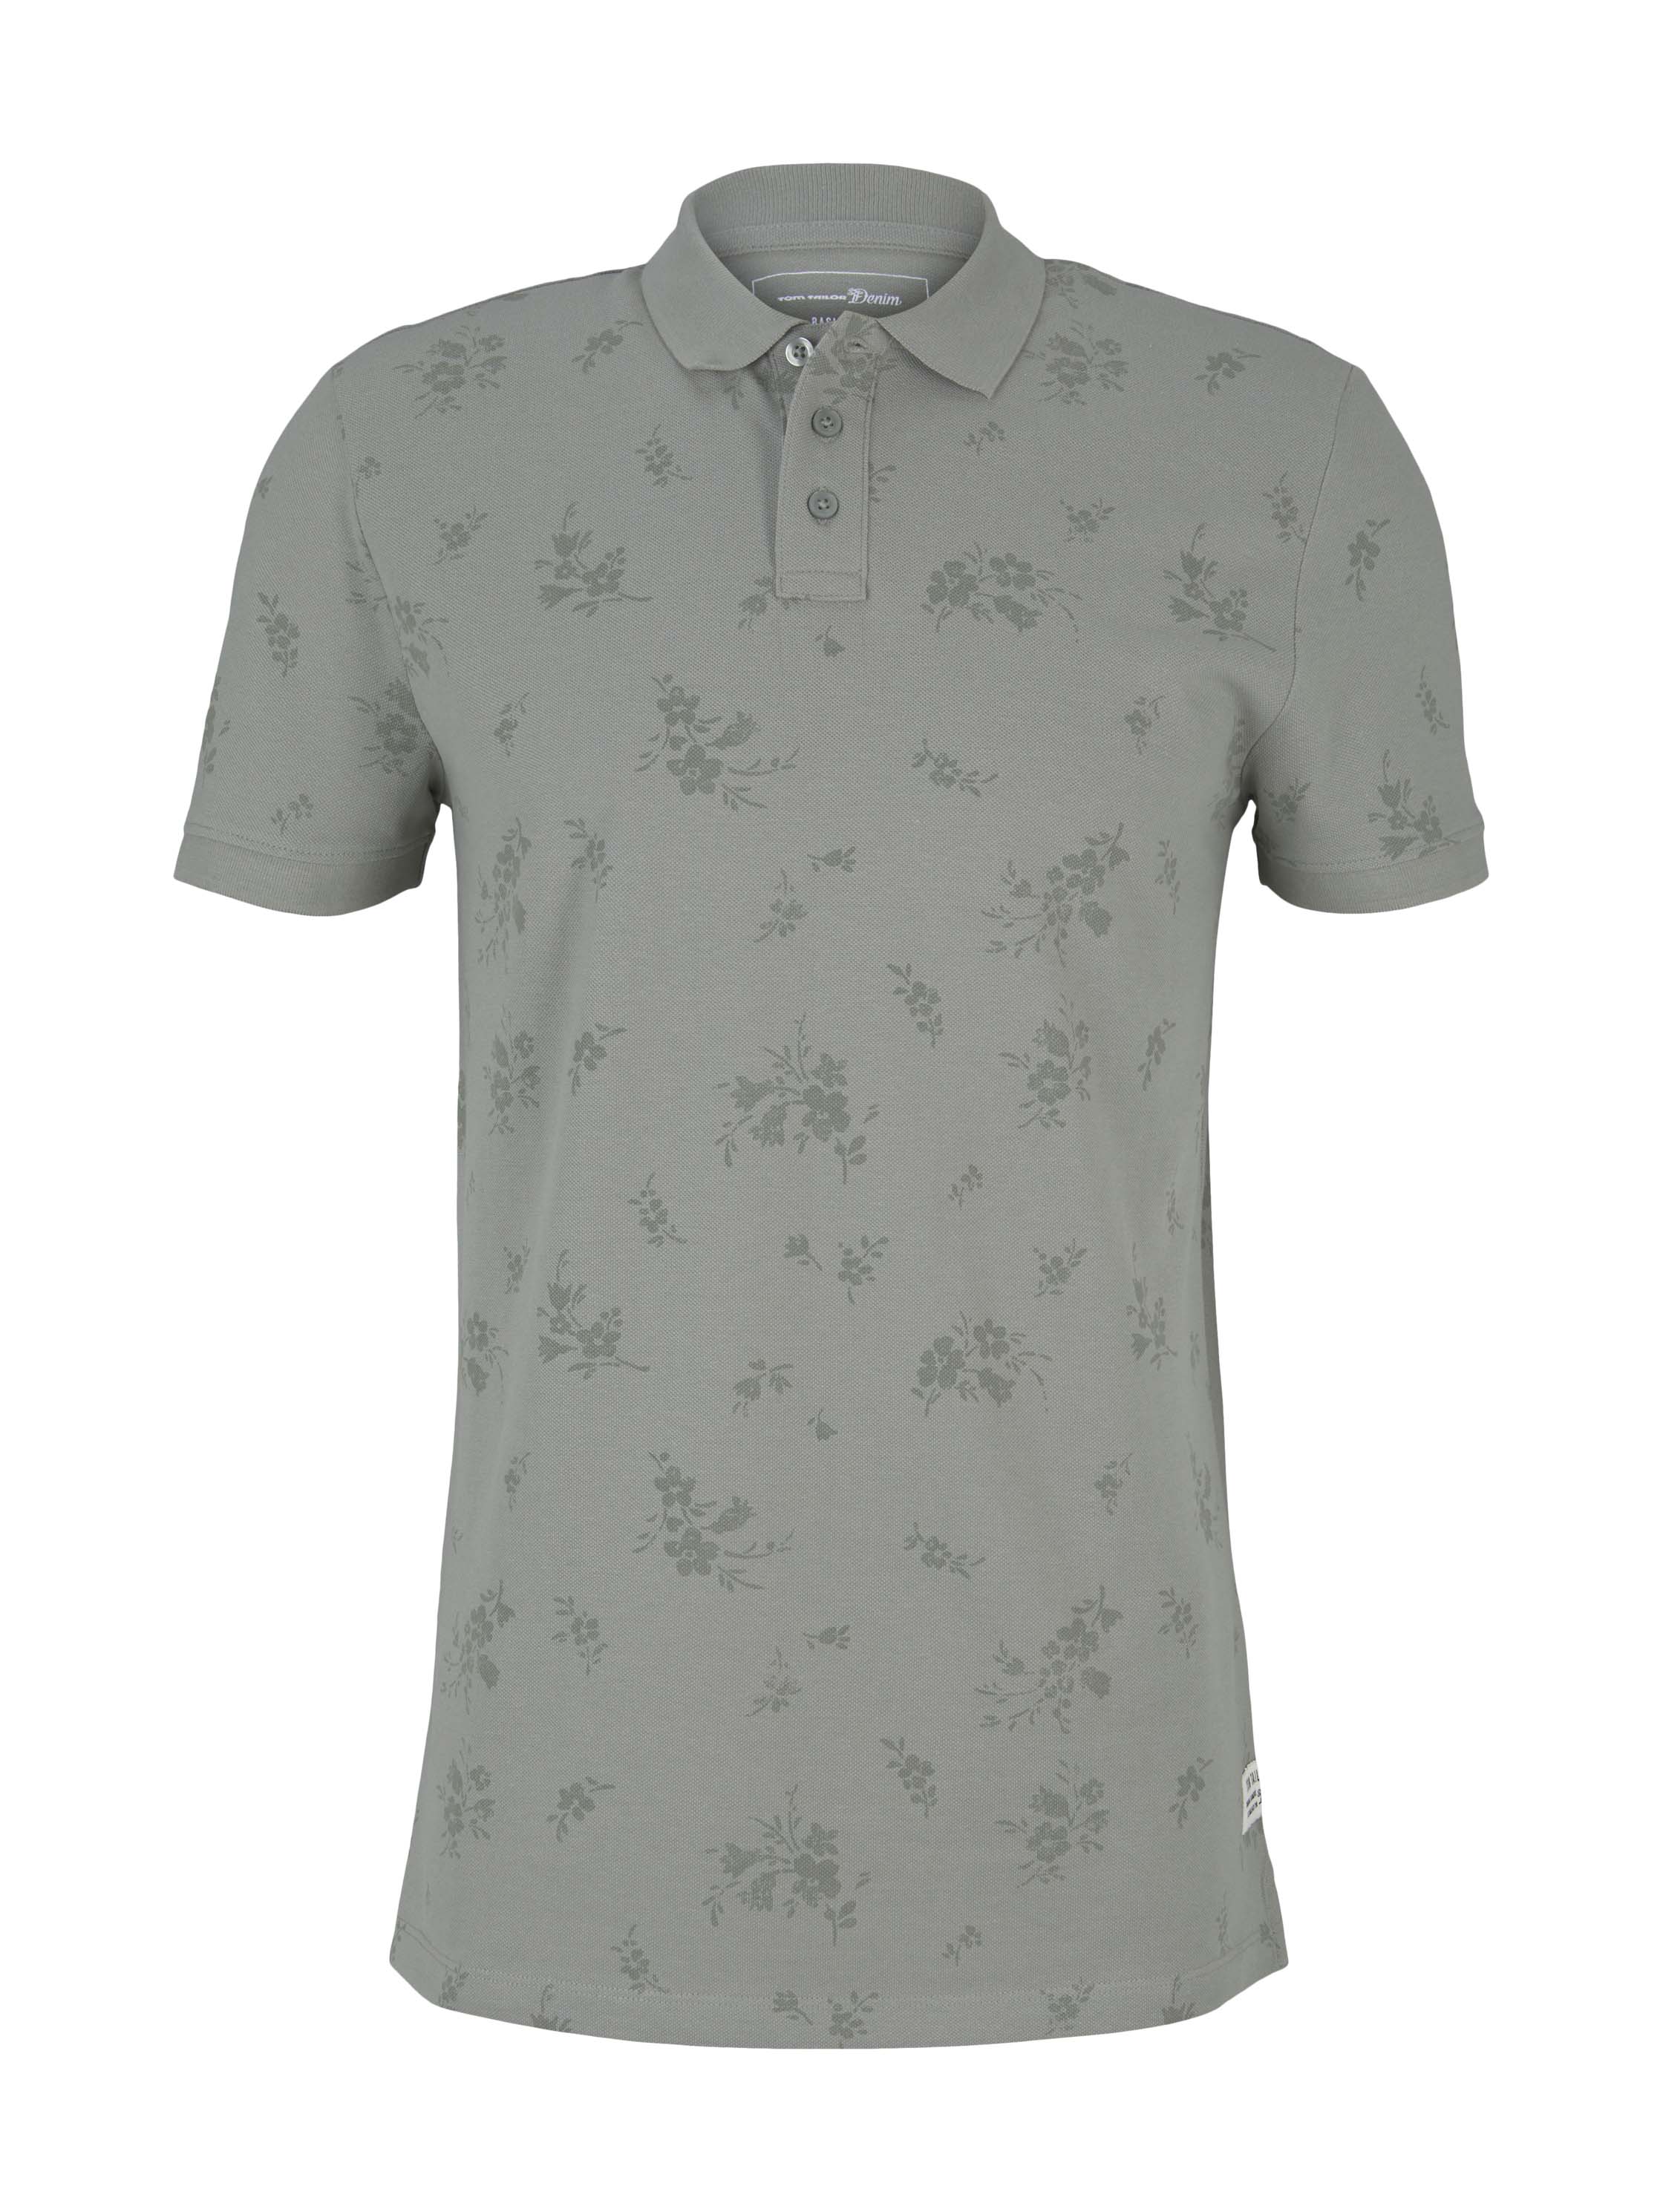 polo with all over print, olive shredded flower print